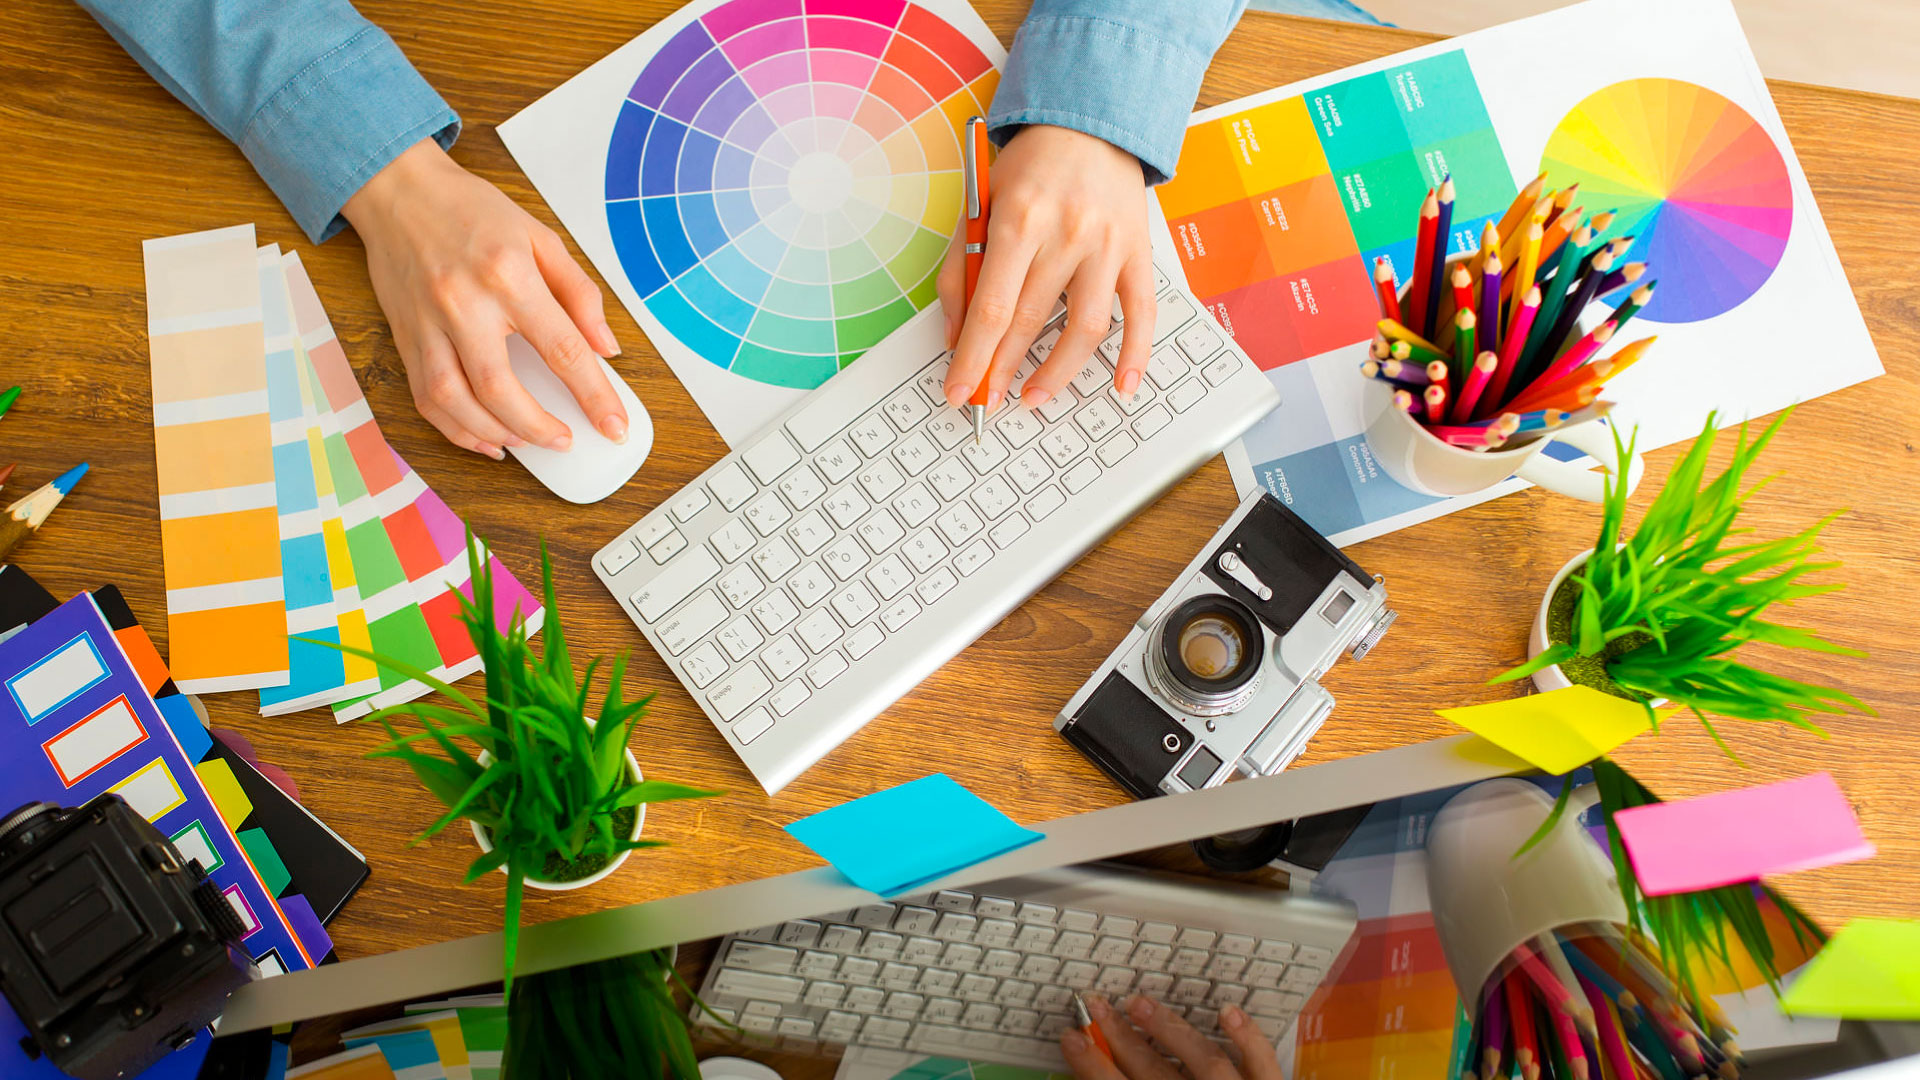 10 Graphic & Web Designer Tools to Make Your Product Stand Out